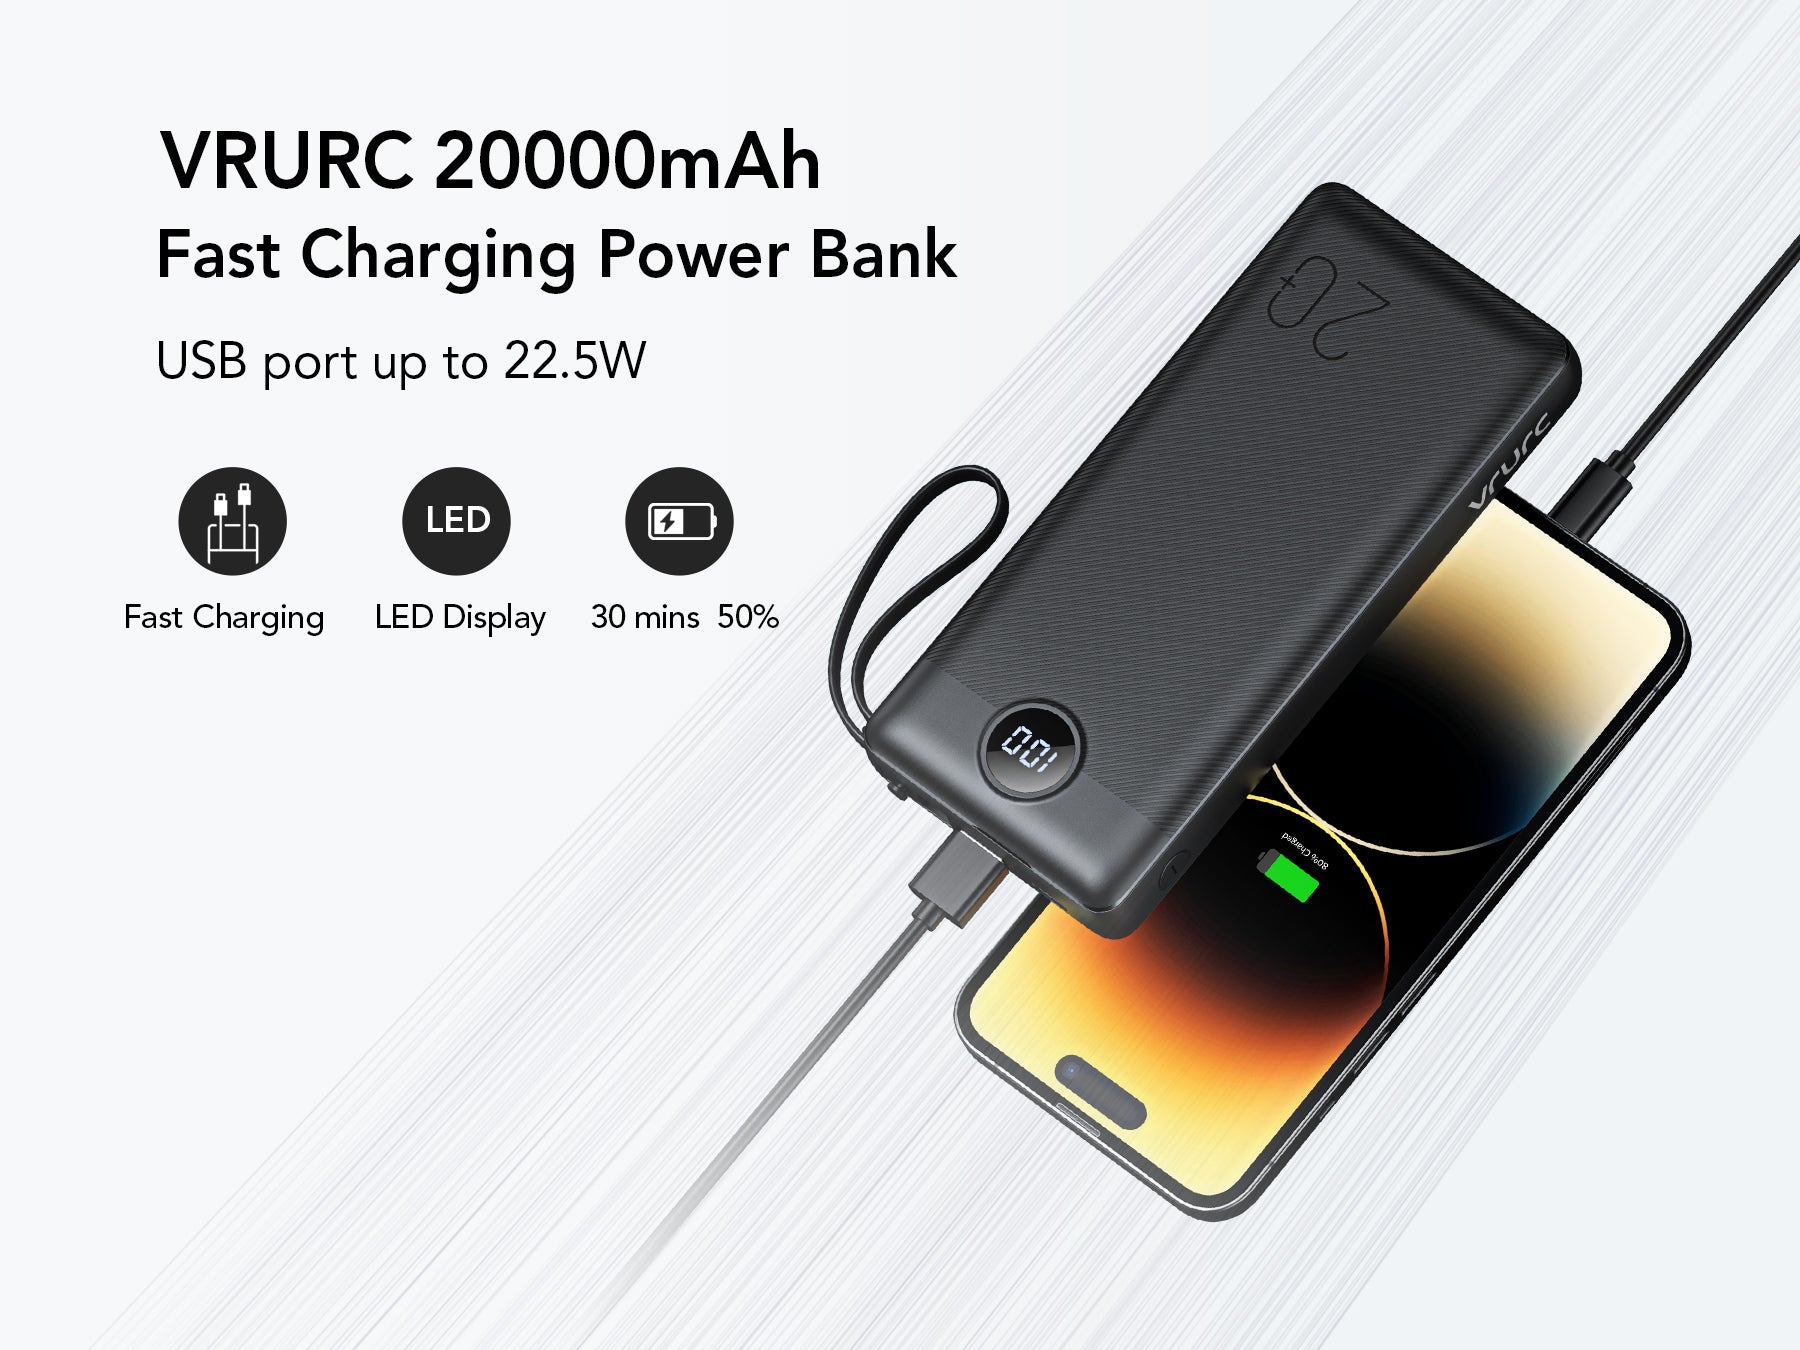 Built in Cords 22.5W PD & QC 3.0 Power Bank - vrurc